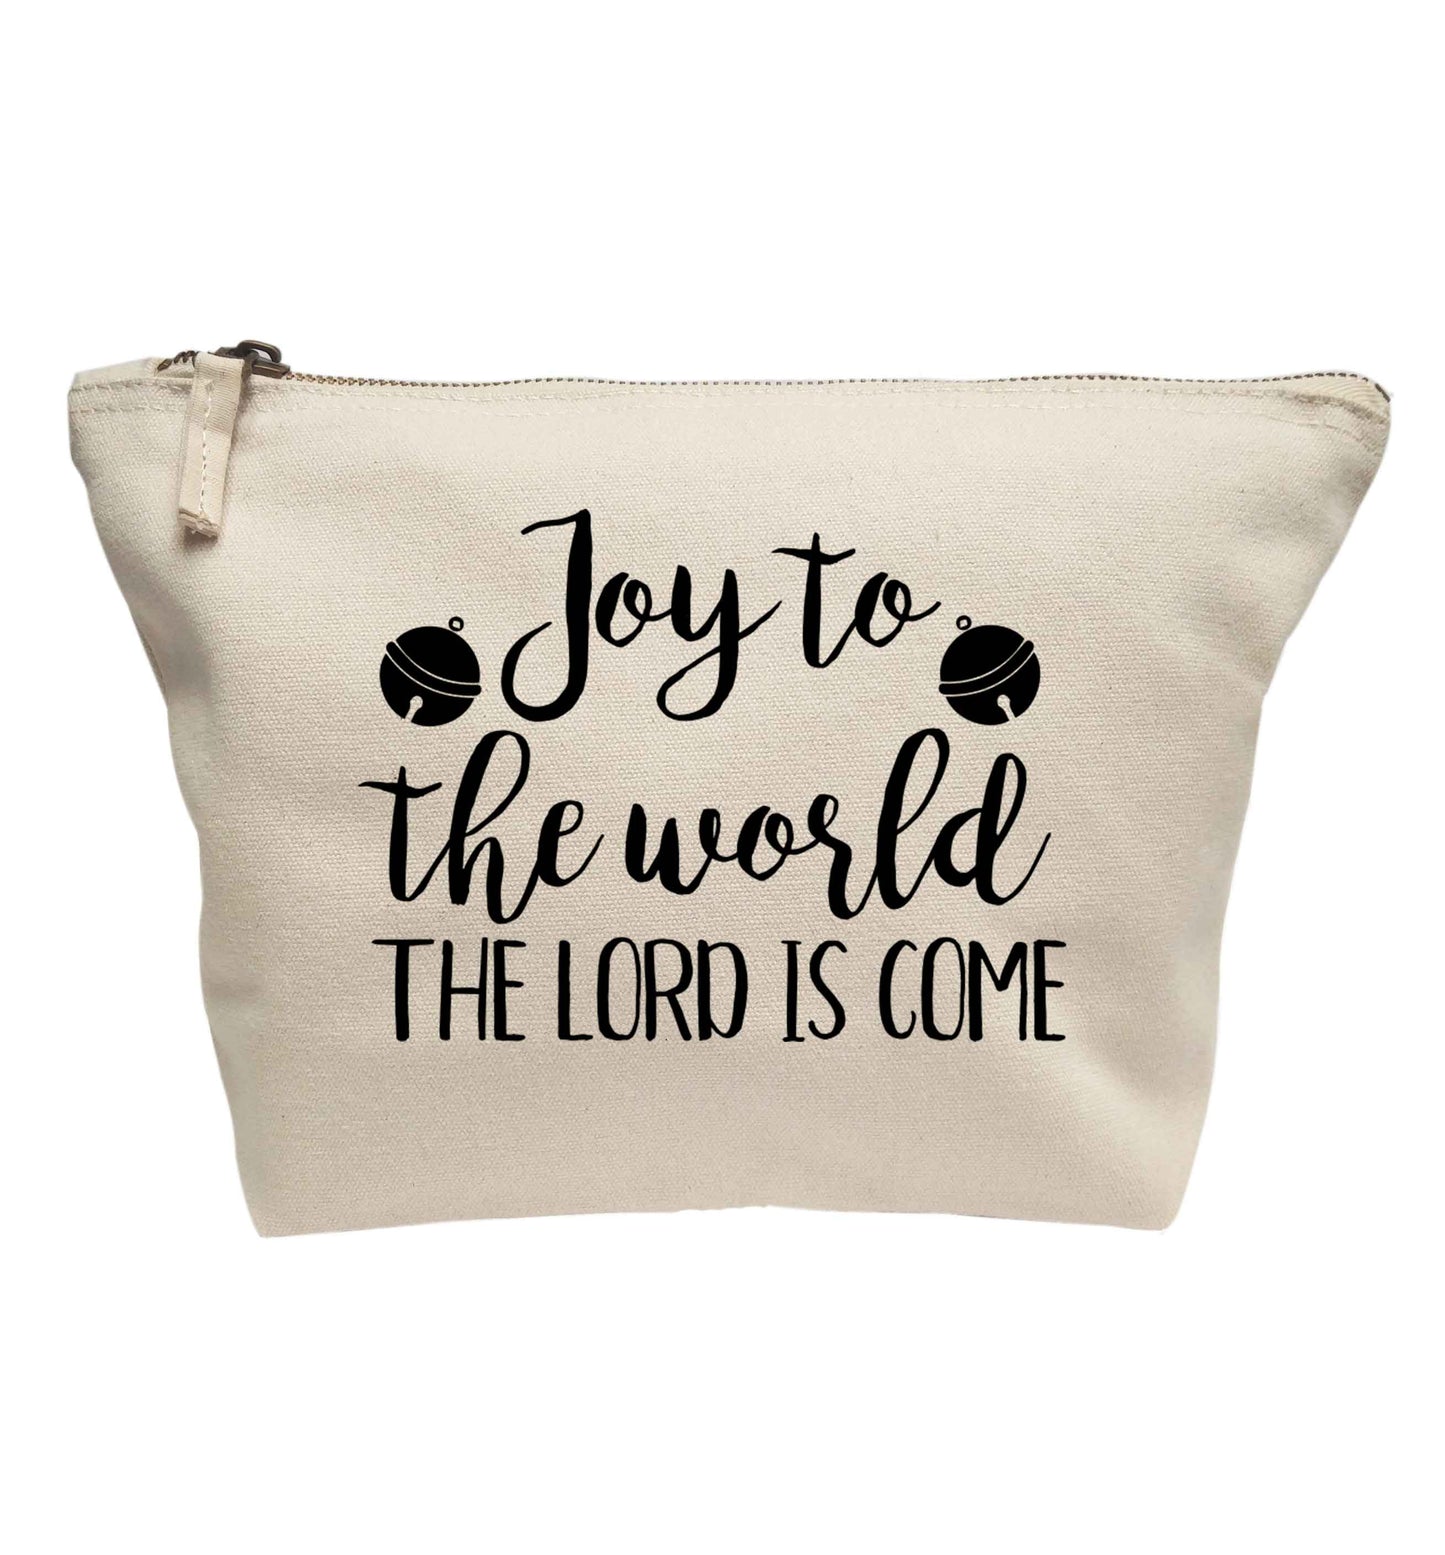 Joy to the world the Lord is come | makeup / wash bag